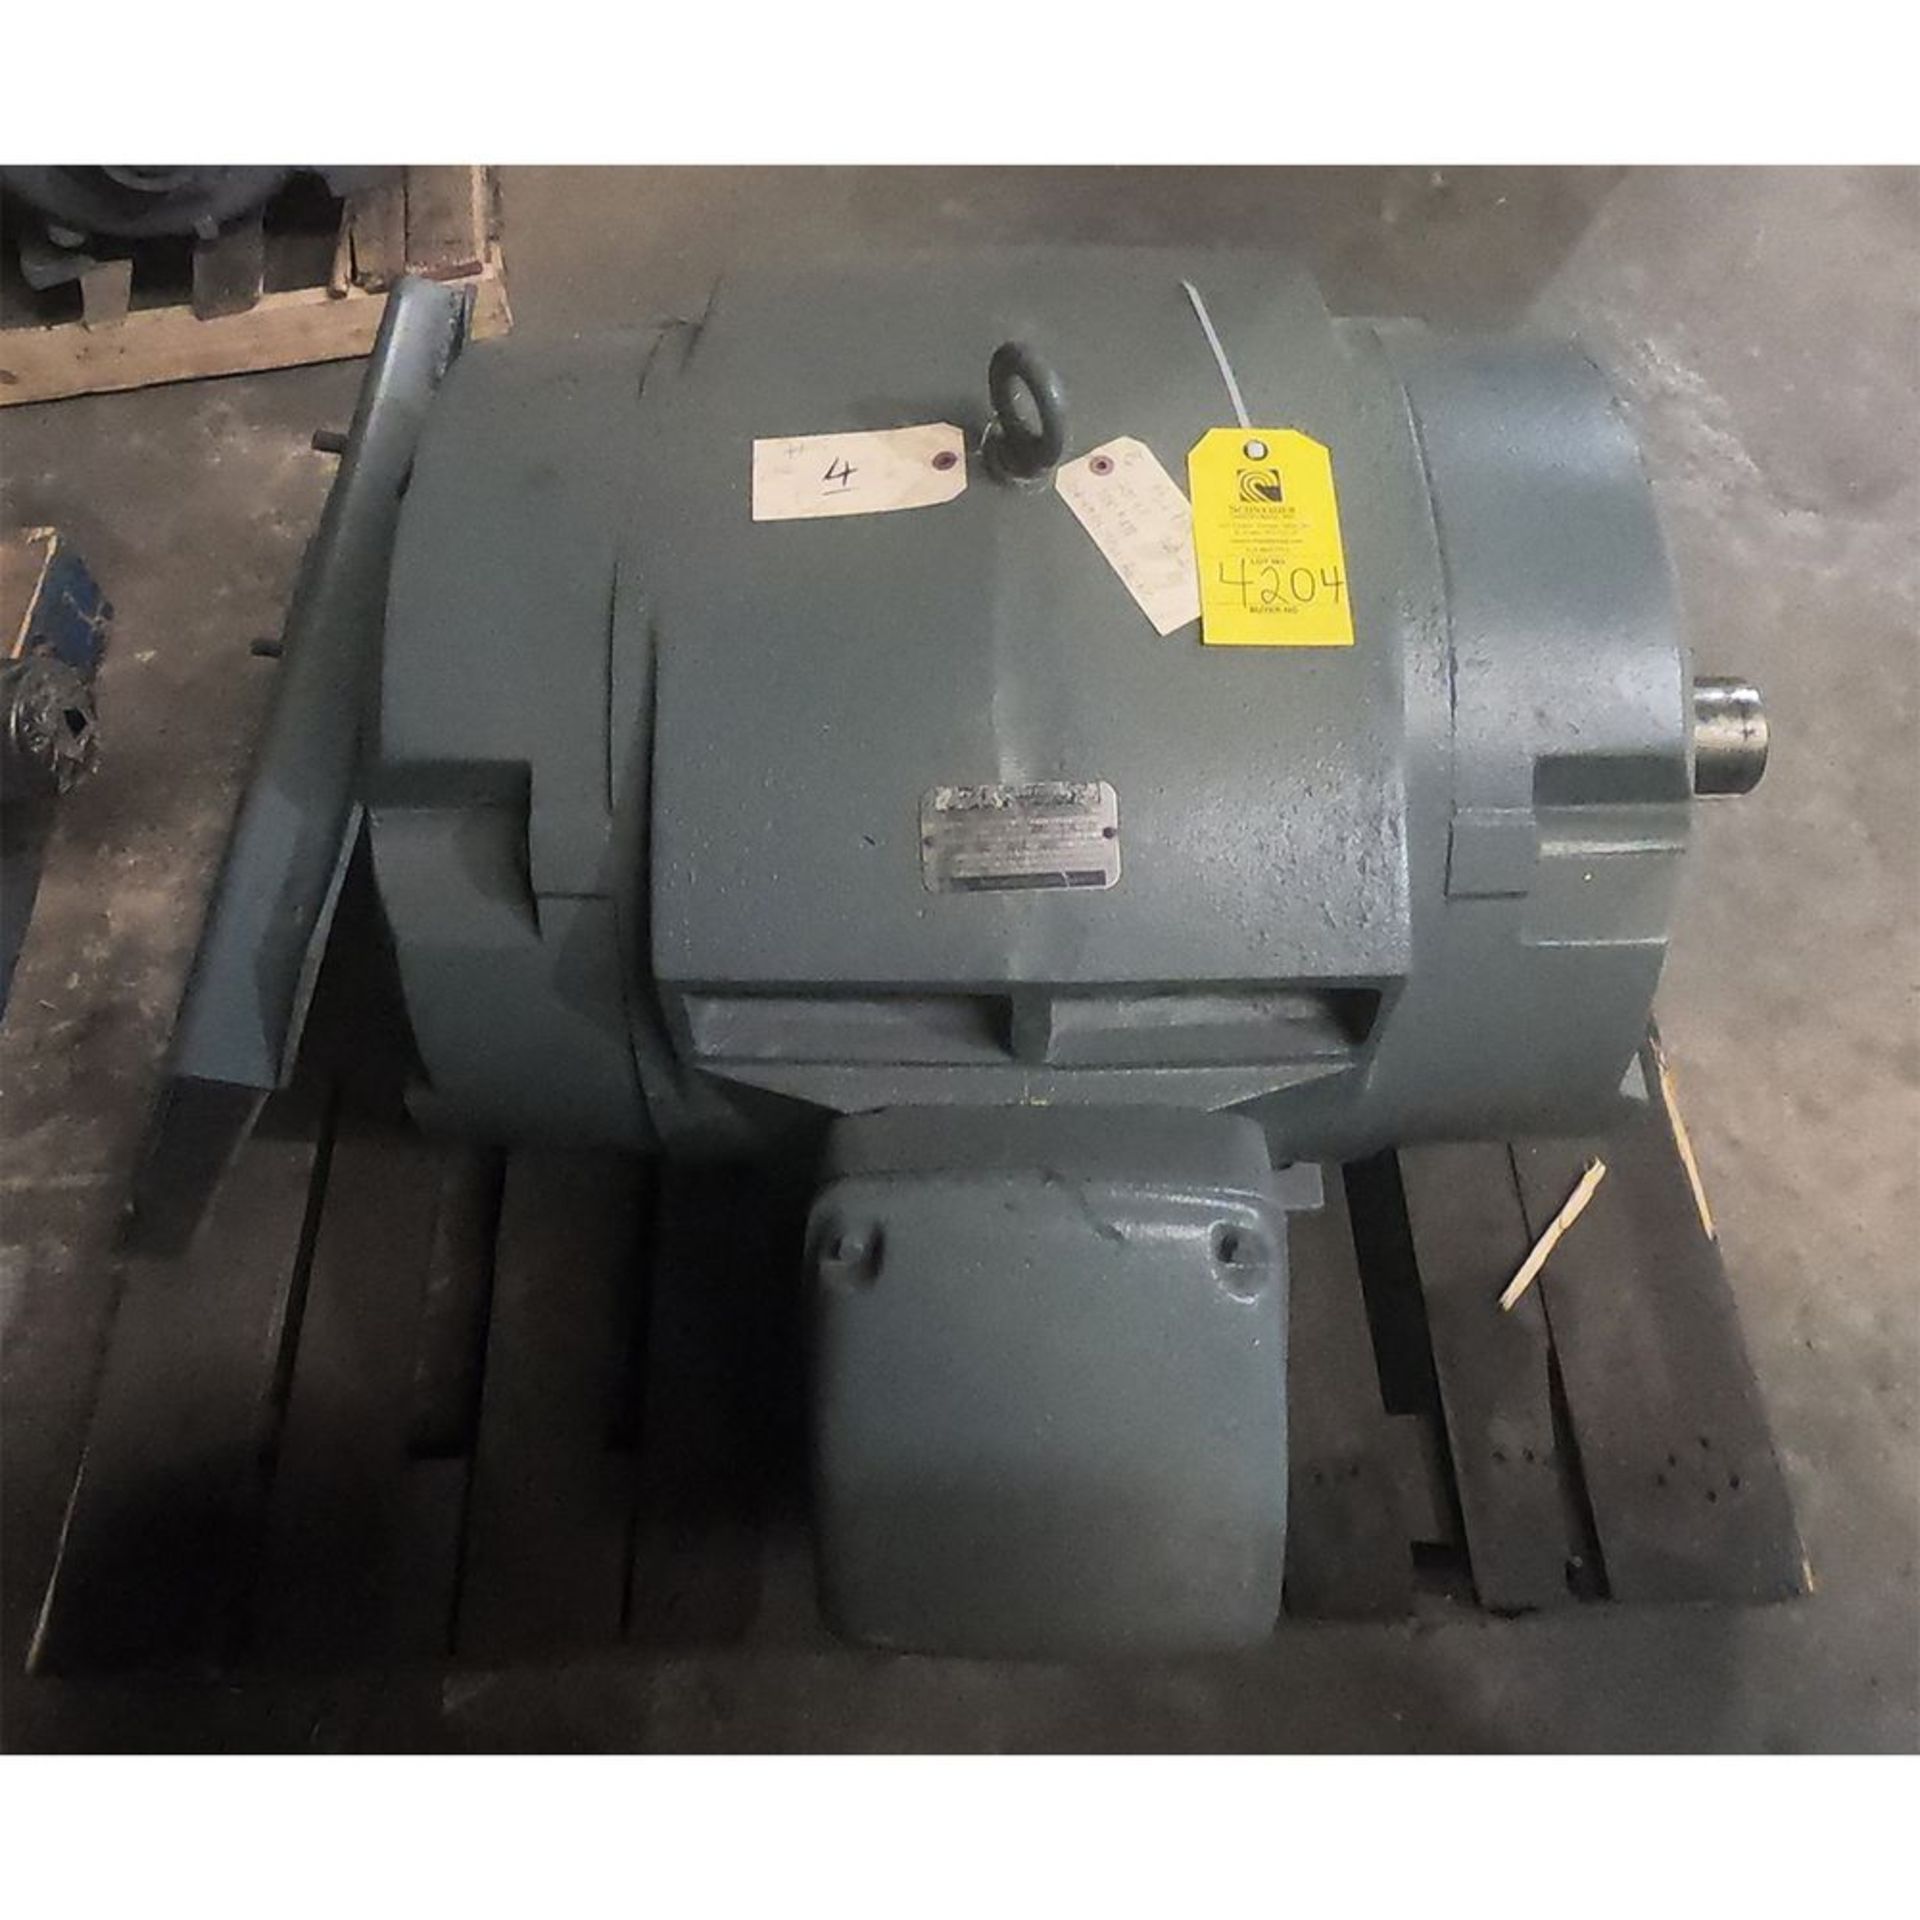 Located: Tyler, TX -- 200 hp motor, load out fee $10 ***Note from Auctioneer: Loading Fees as stated